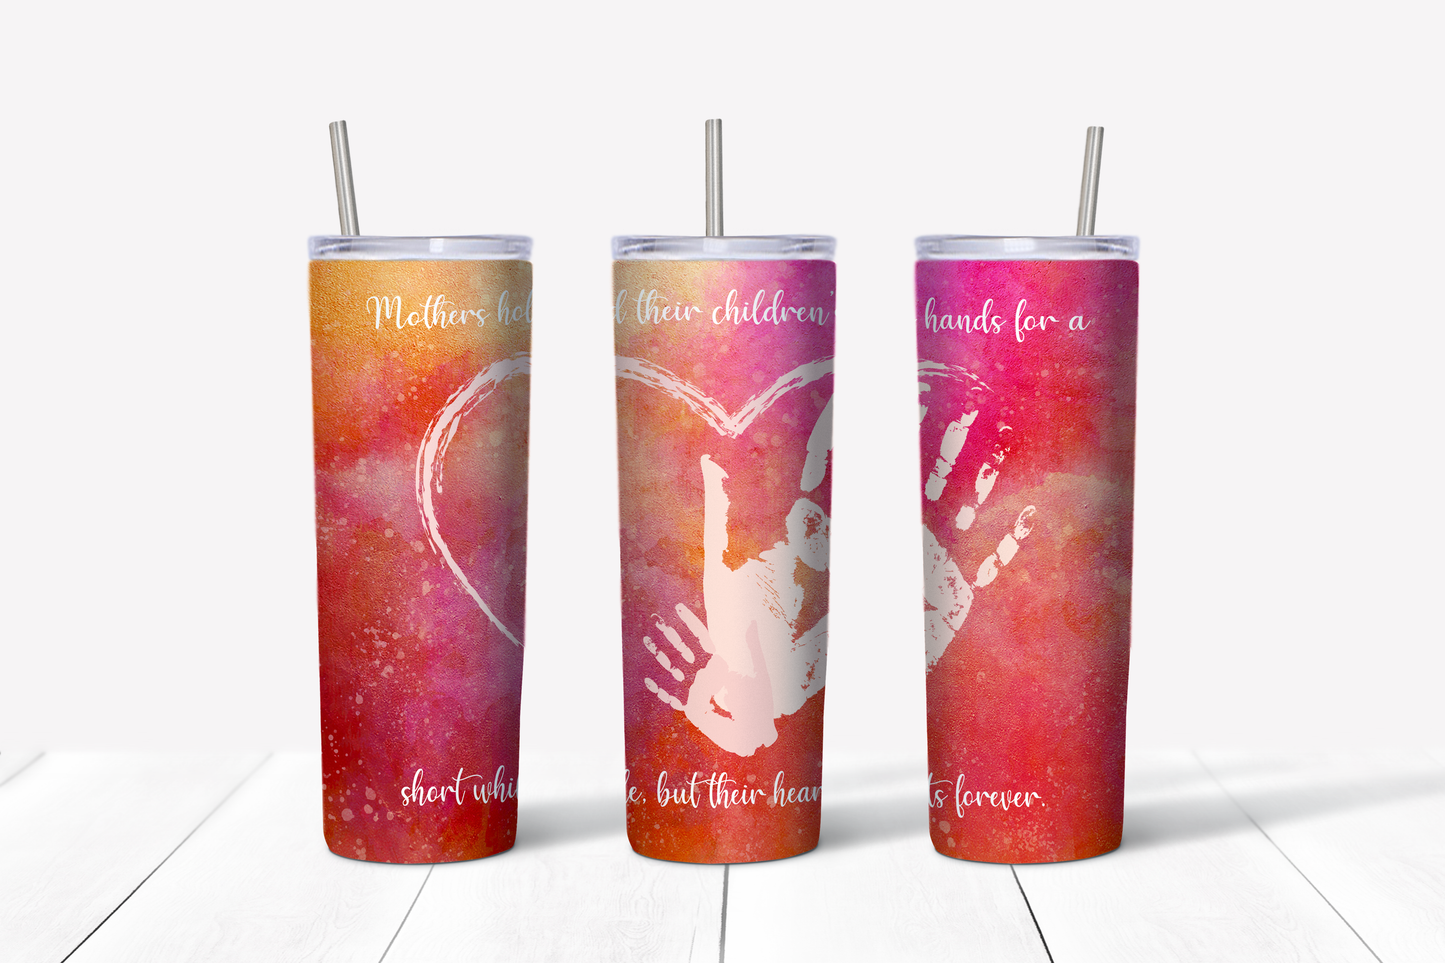 Mothers Hold their Children's Hands 20 oz Tumbler